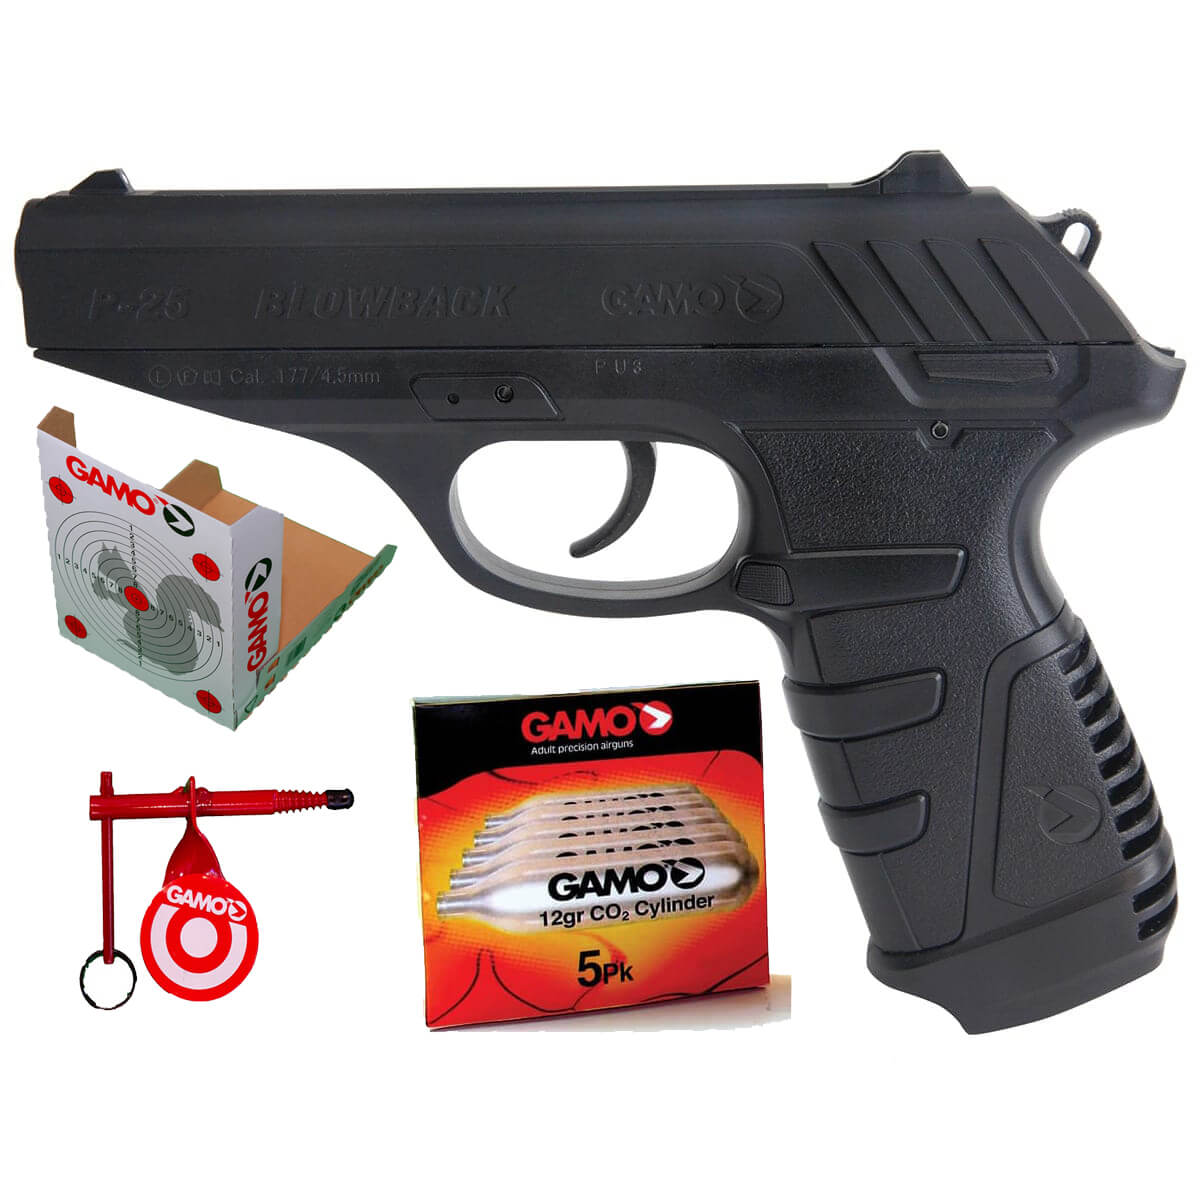 PT85 Pistol Pack with Gamo .177 Pellets and 100 Paper Targets